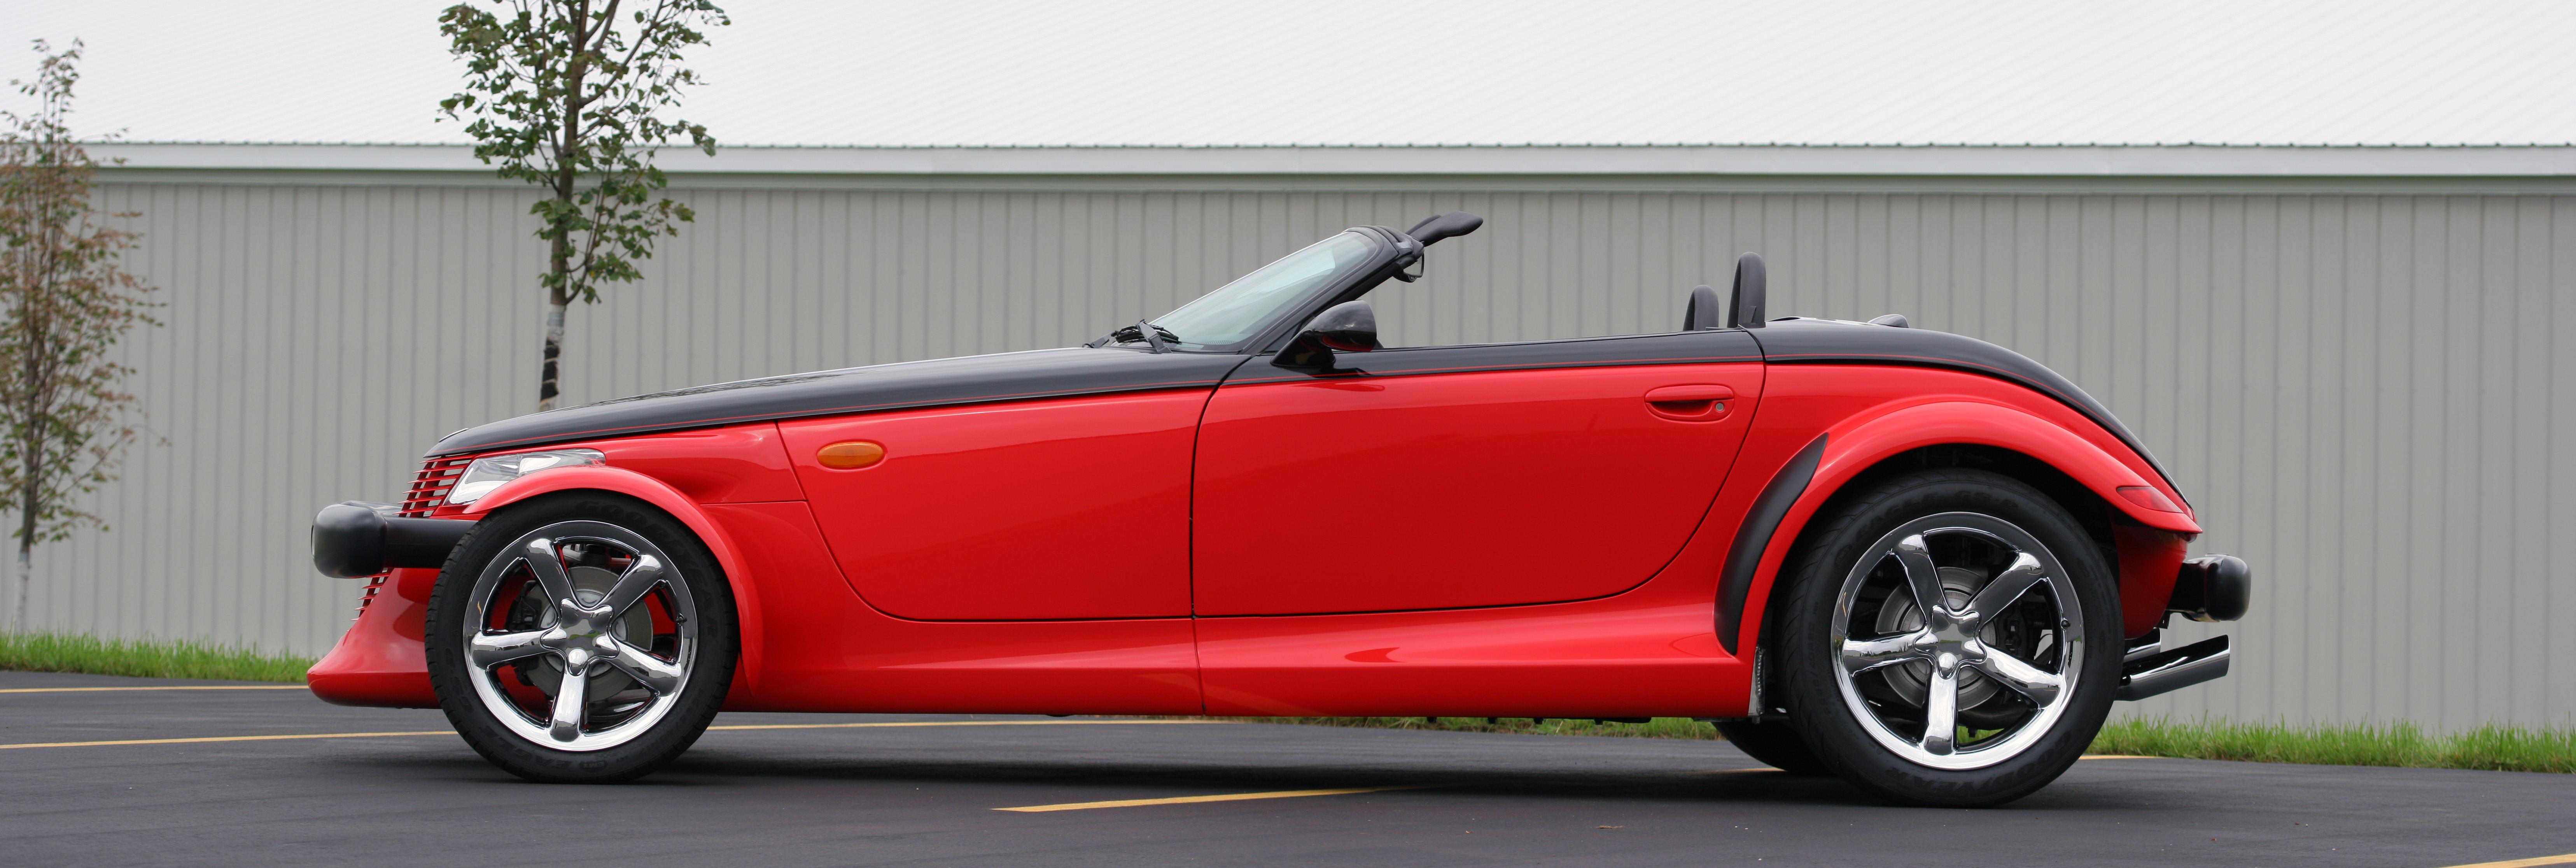 Vehicles Plymouth Prowler HD Wallpaper | Background Image